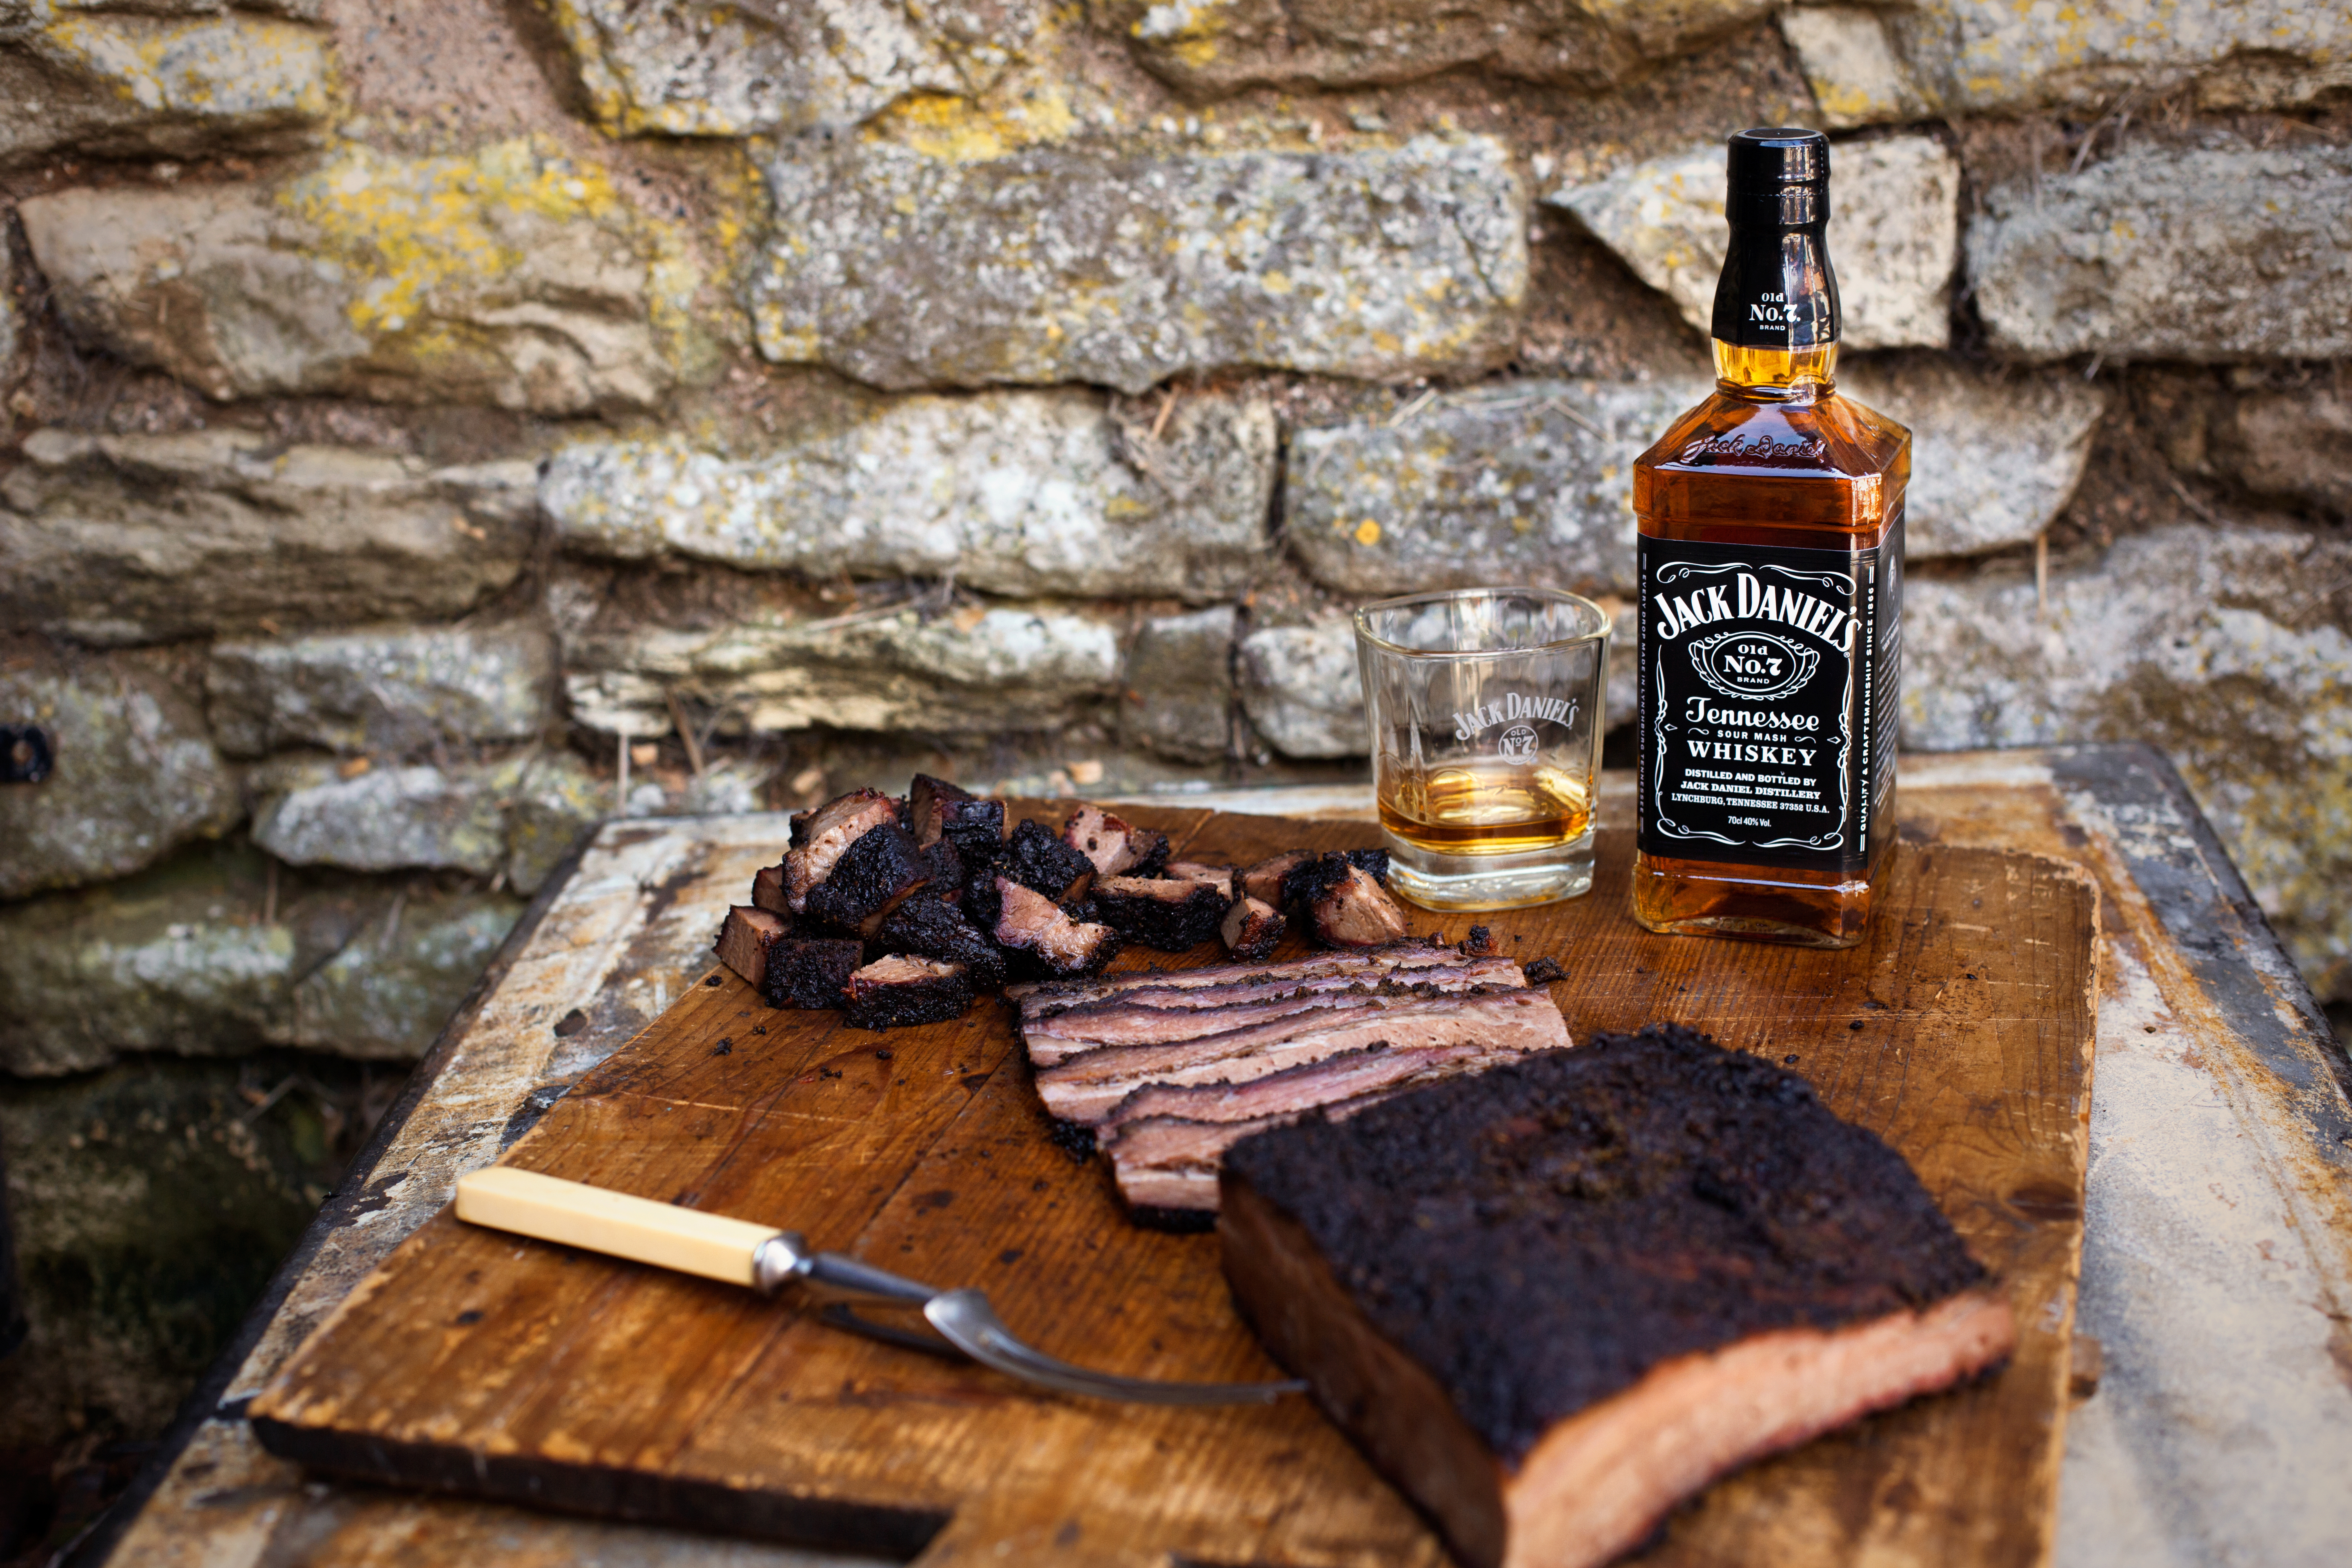 7 days of American Whiskey with Gaucho & Jack Daniels